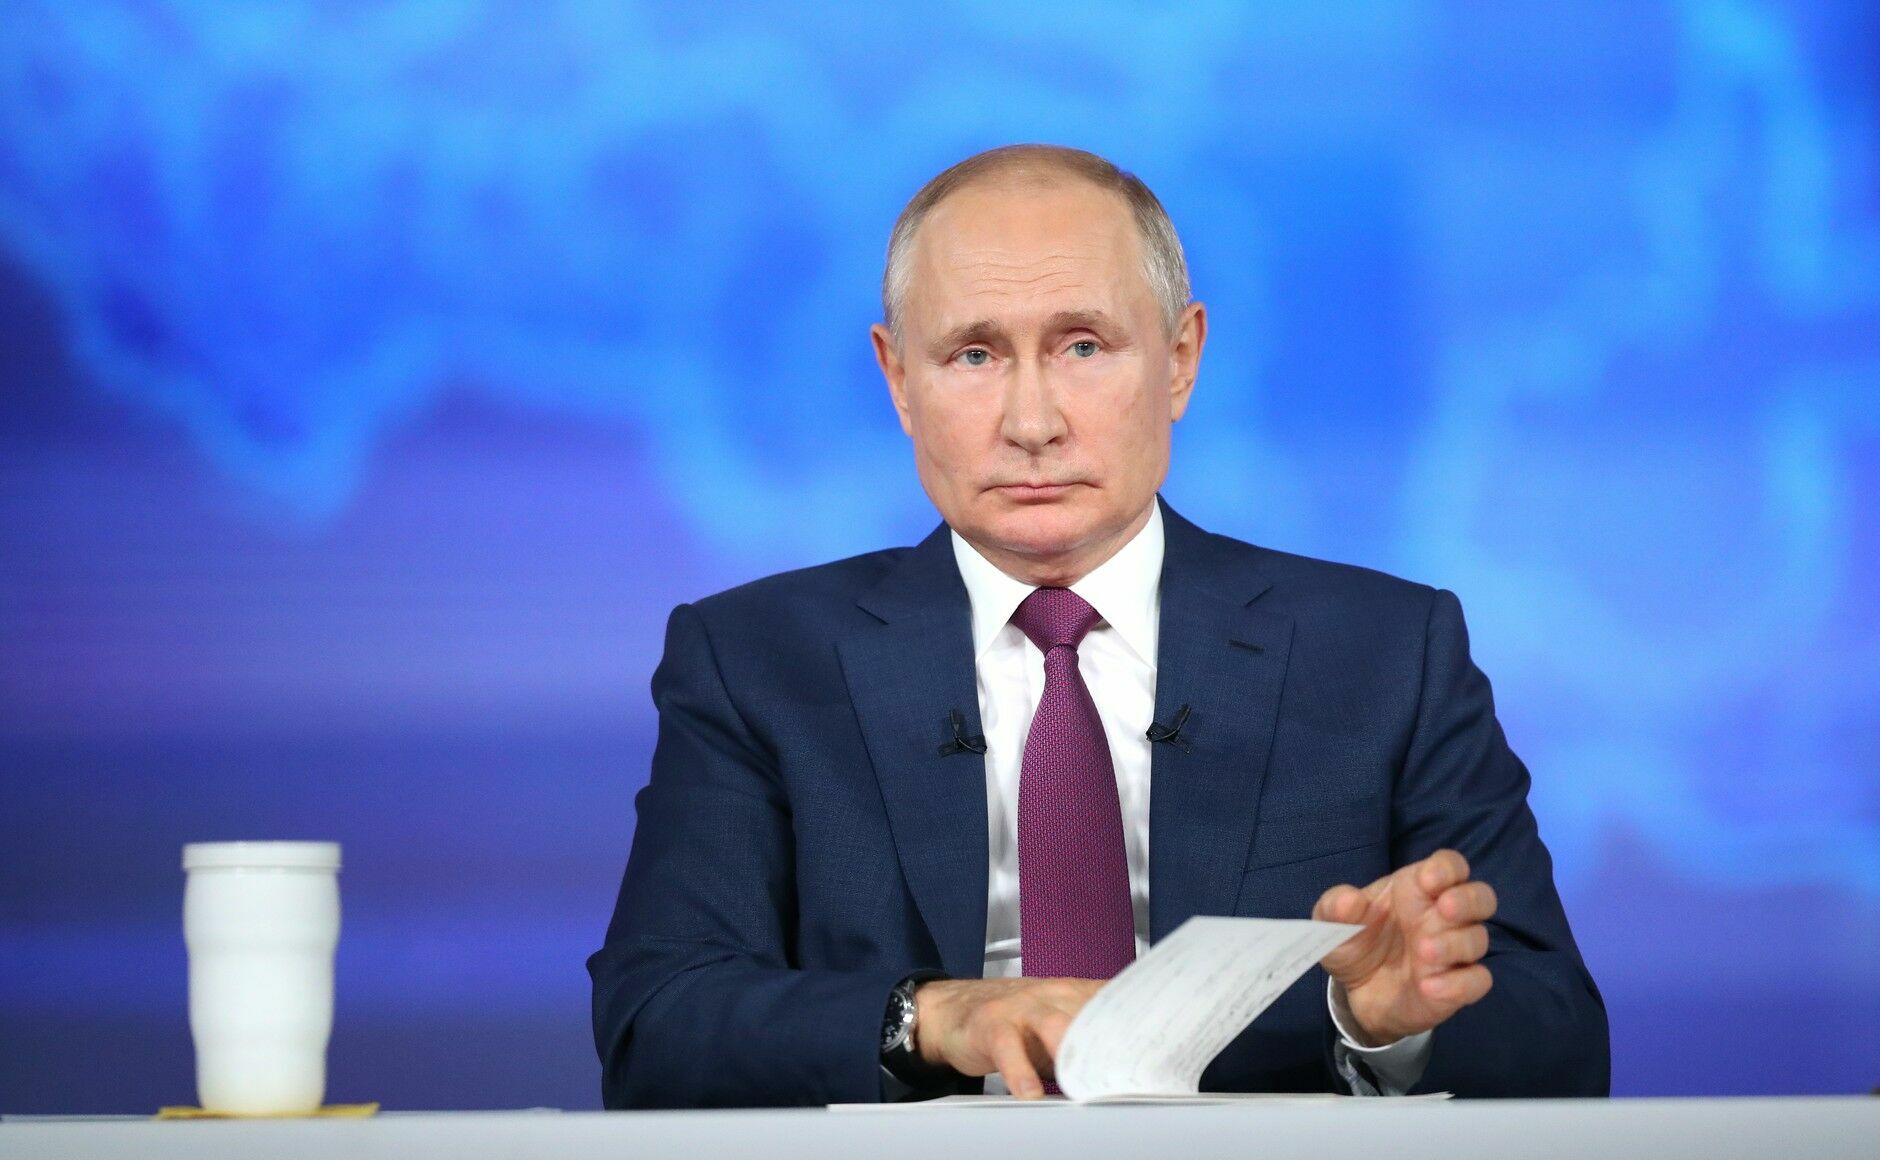 Putin agreed with the proposal to send volunteers to Ukraine